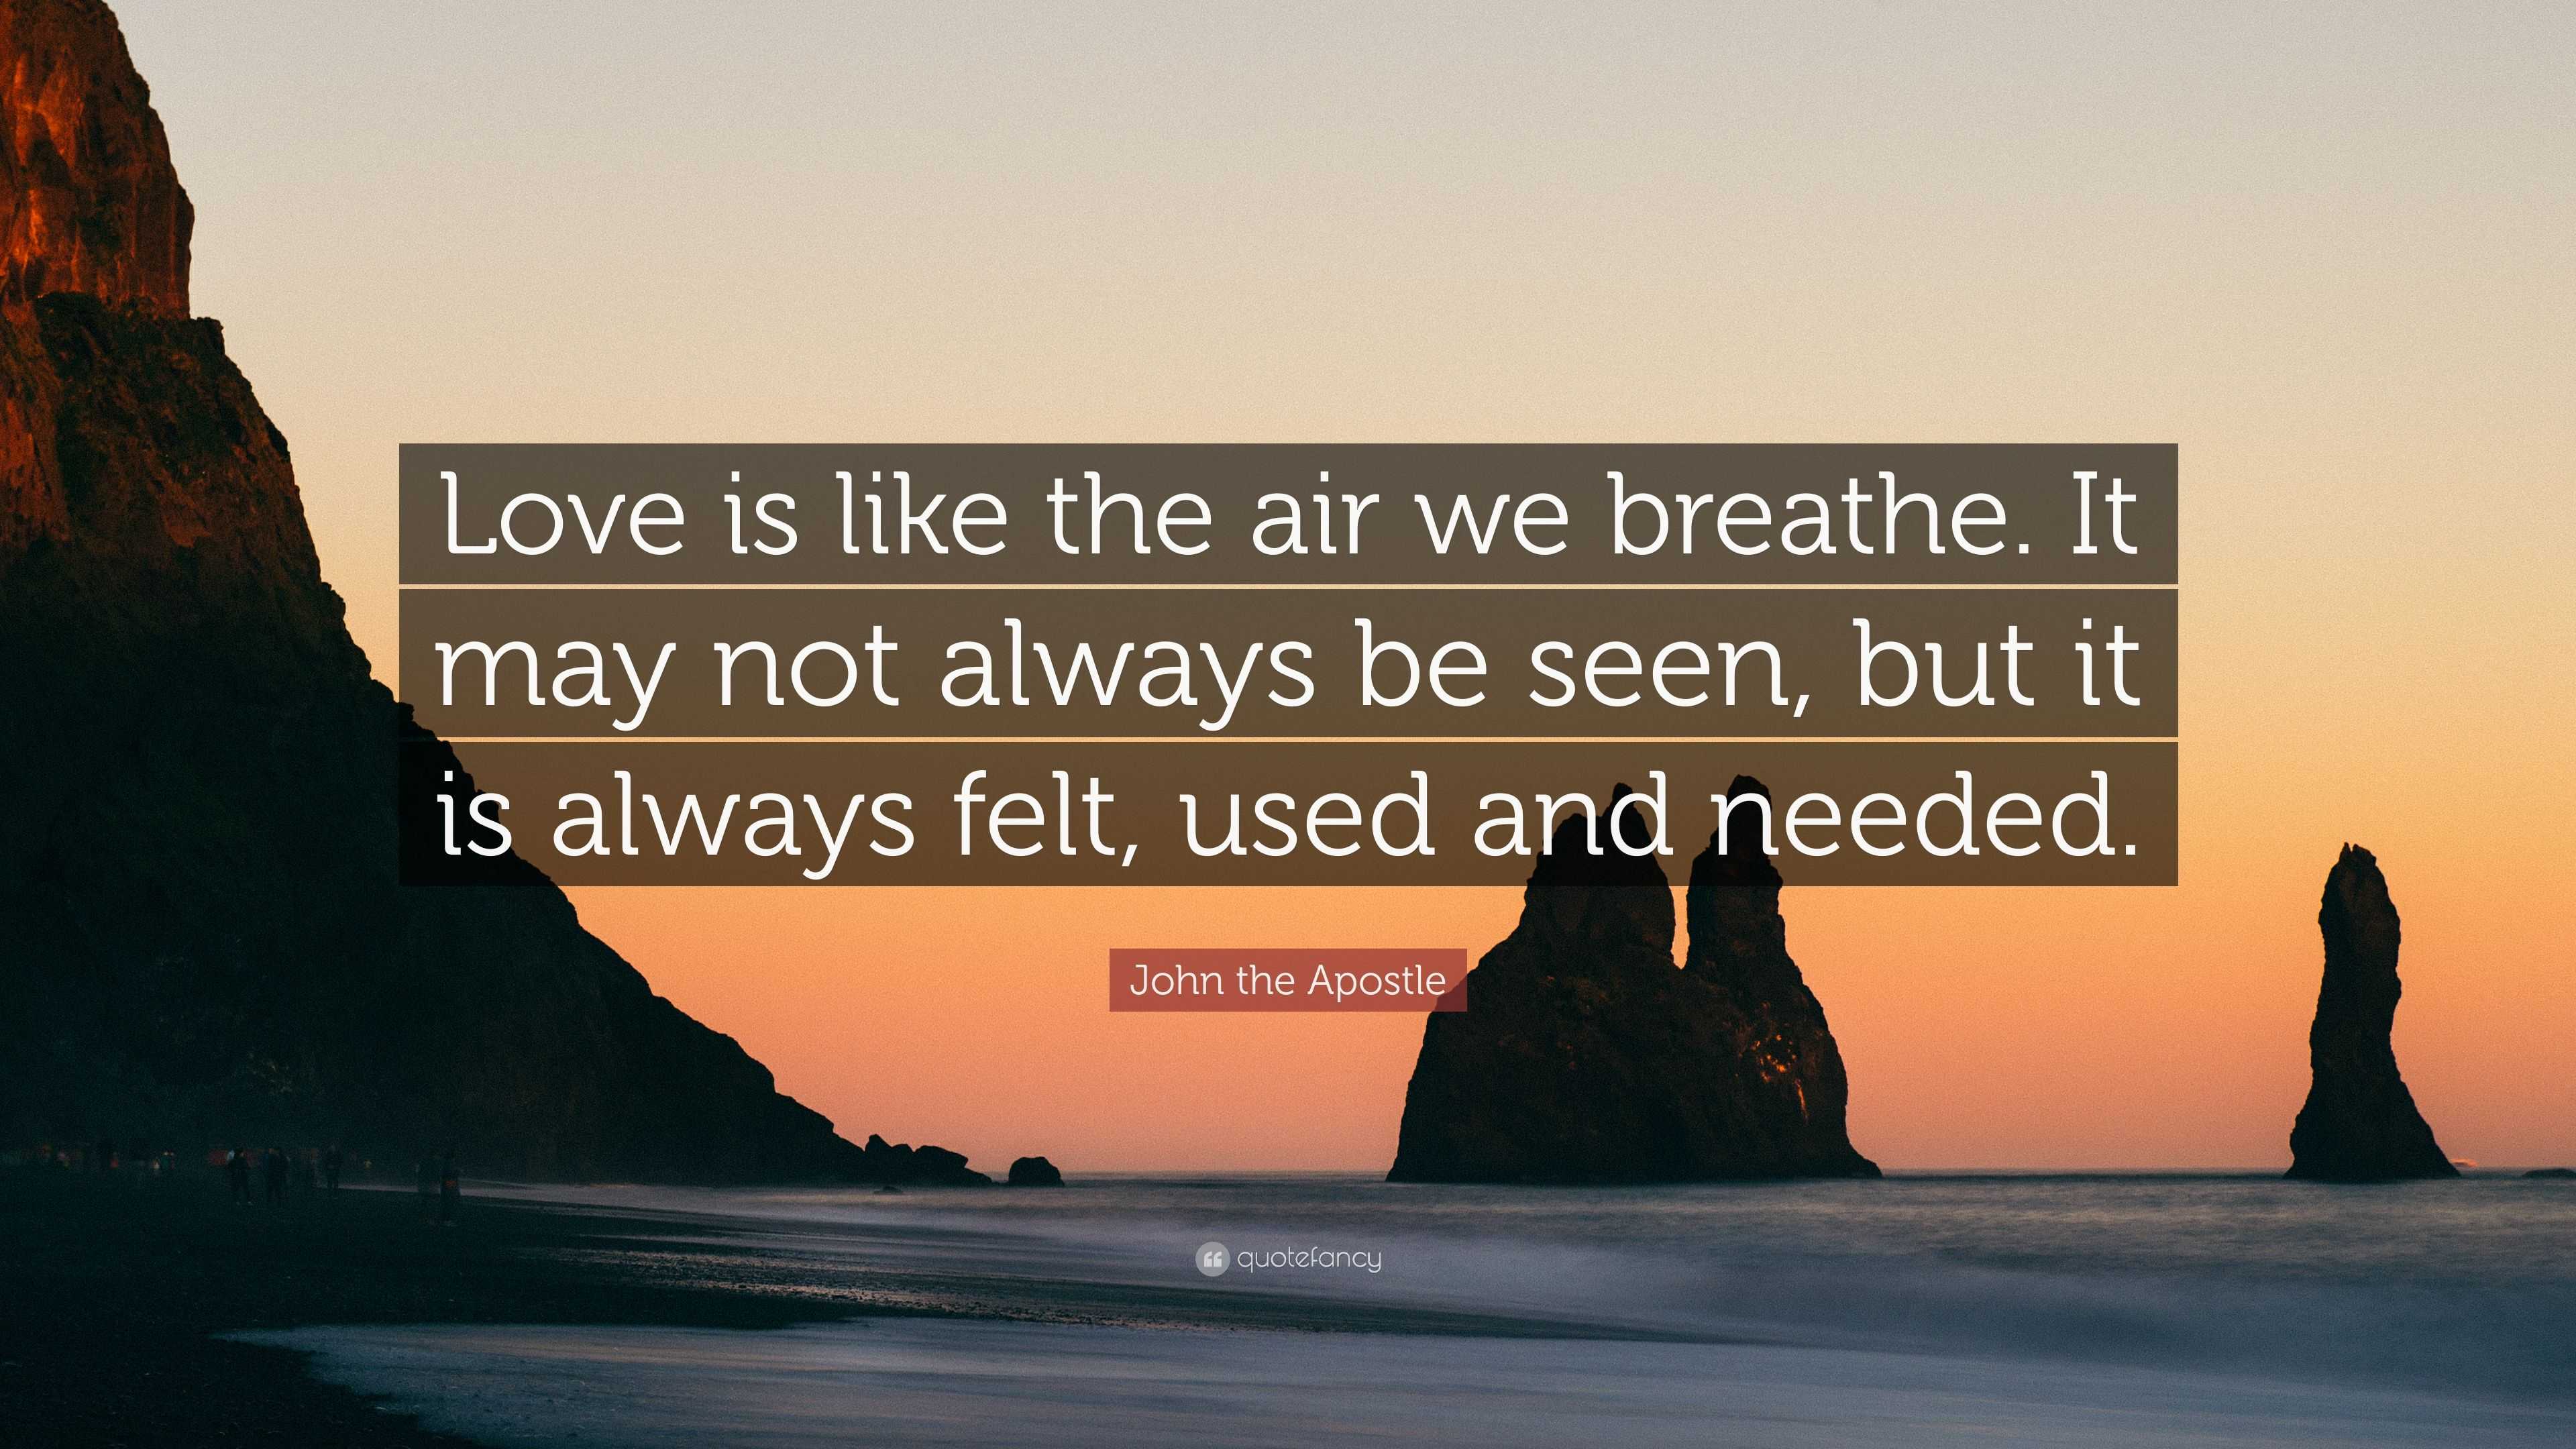 John the Apostle Quote “Love is like the air we breathe It may